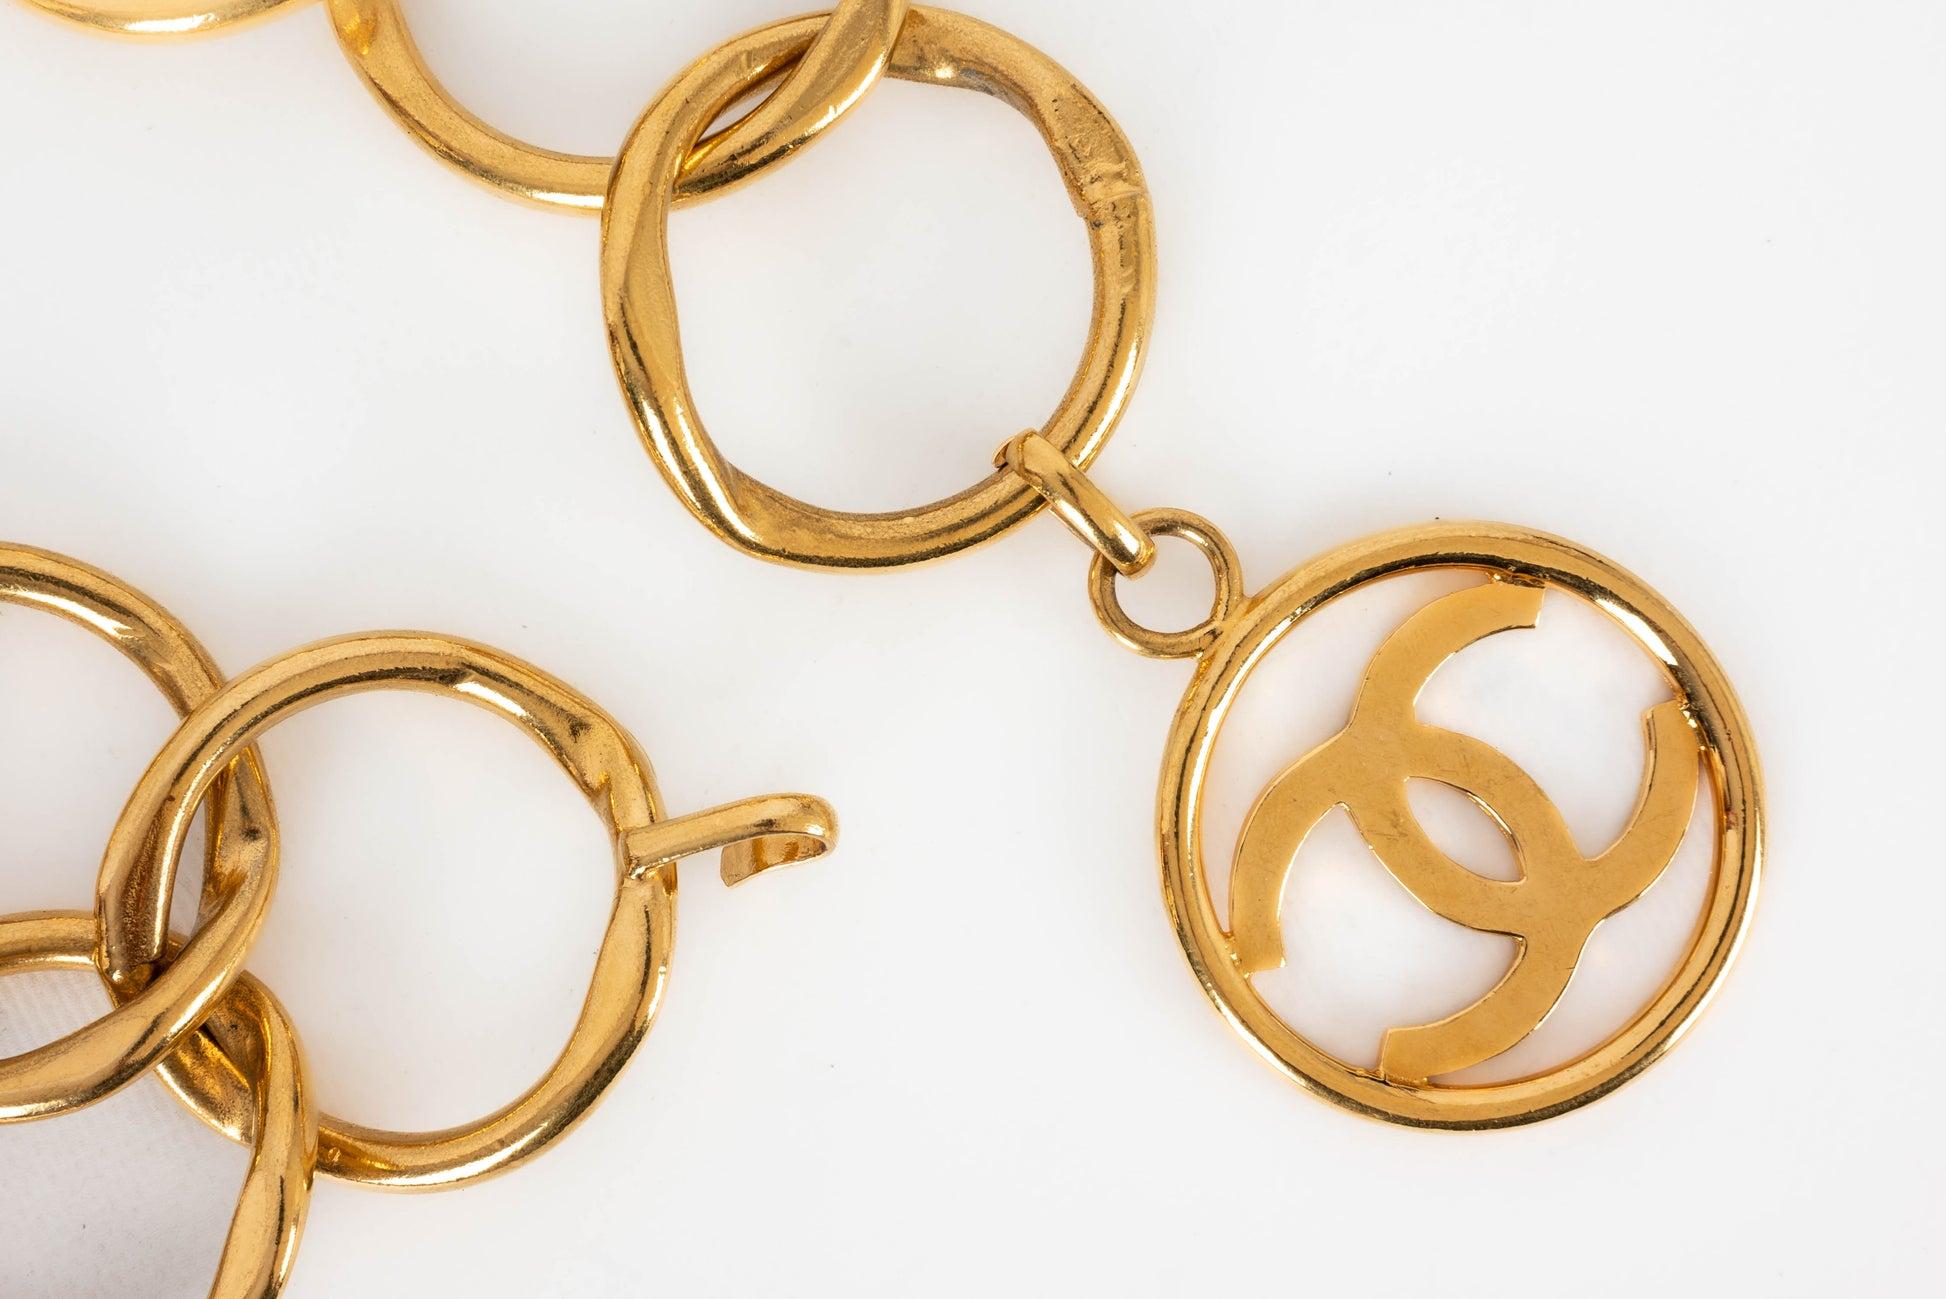 Chanel Belt Composed of Big Links in Gold-Plated Metal, 1990s In Excellent Condition For Sale In SAINT-OUEN-SUR-SEINE, FR